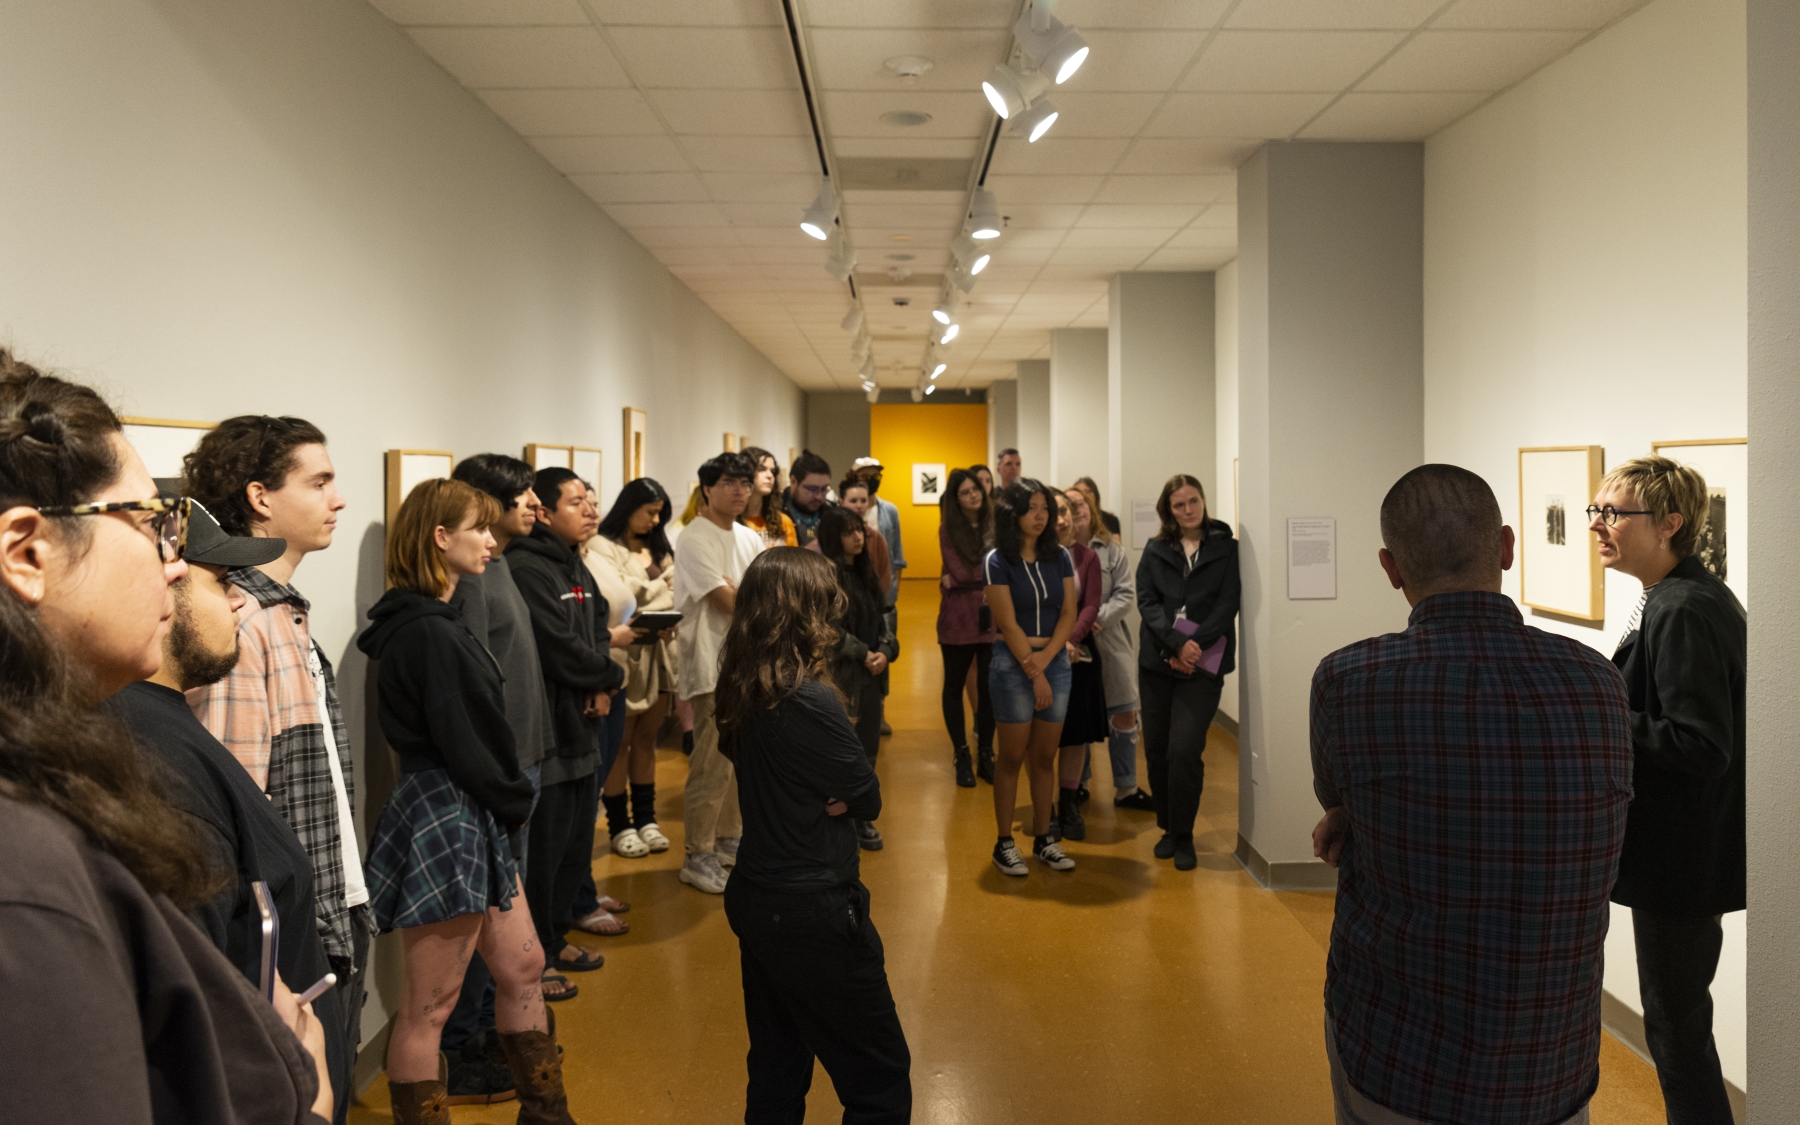 Kevin Mulhearn's class "Twentieth Century Photography” attends a tour with Curator Mary Statzer